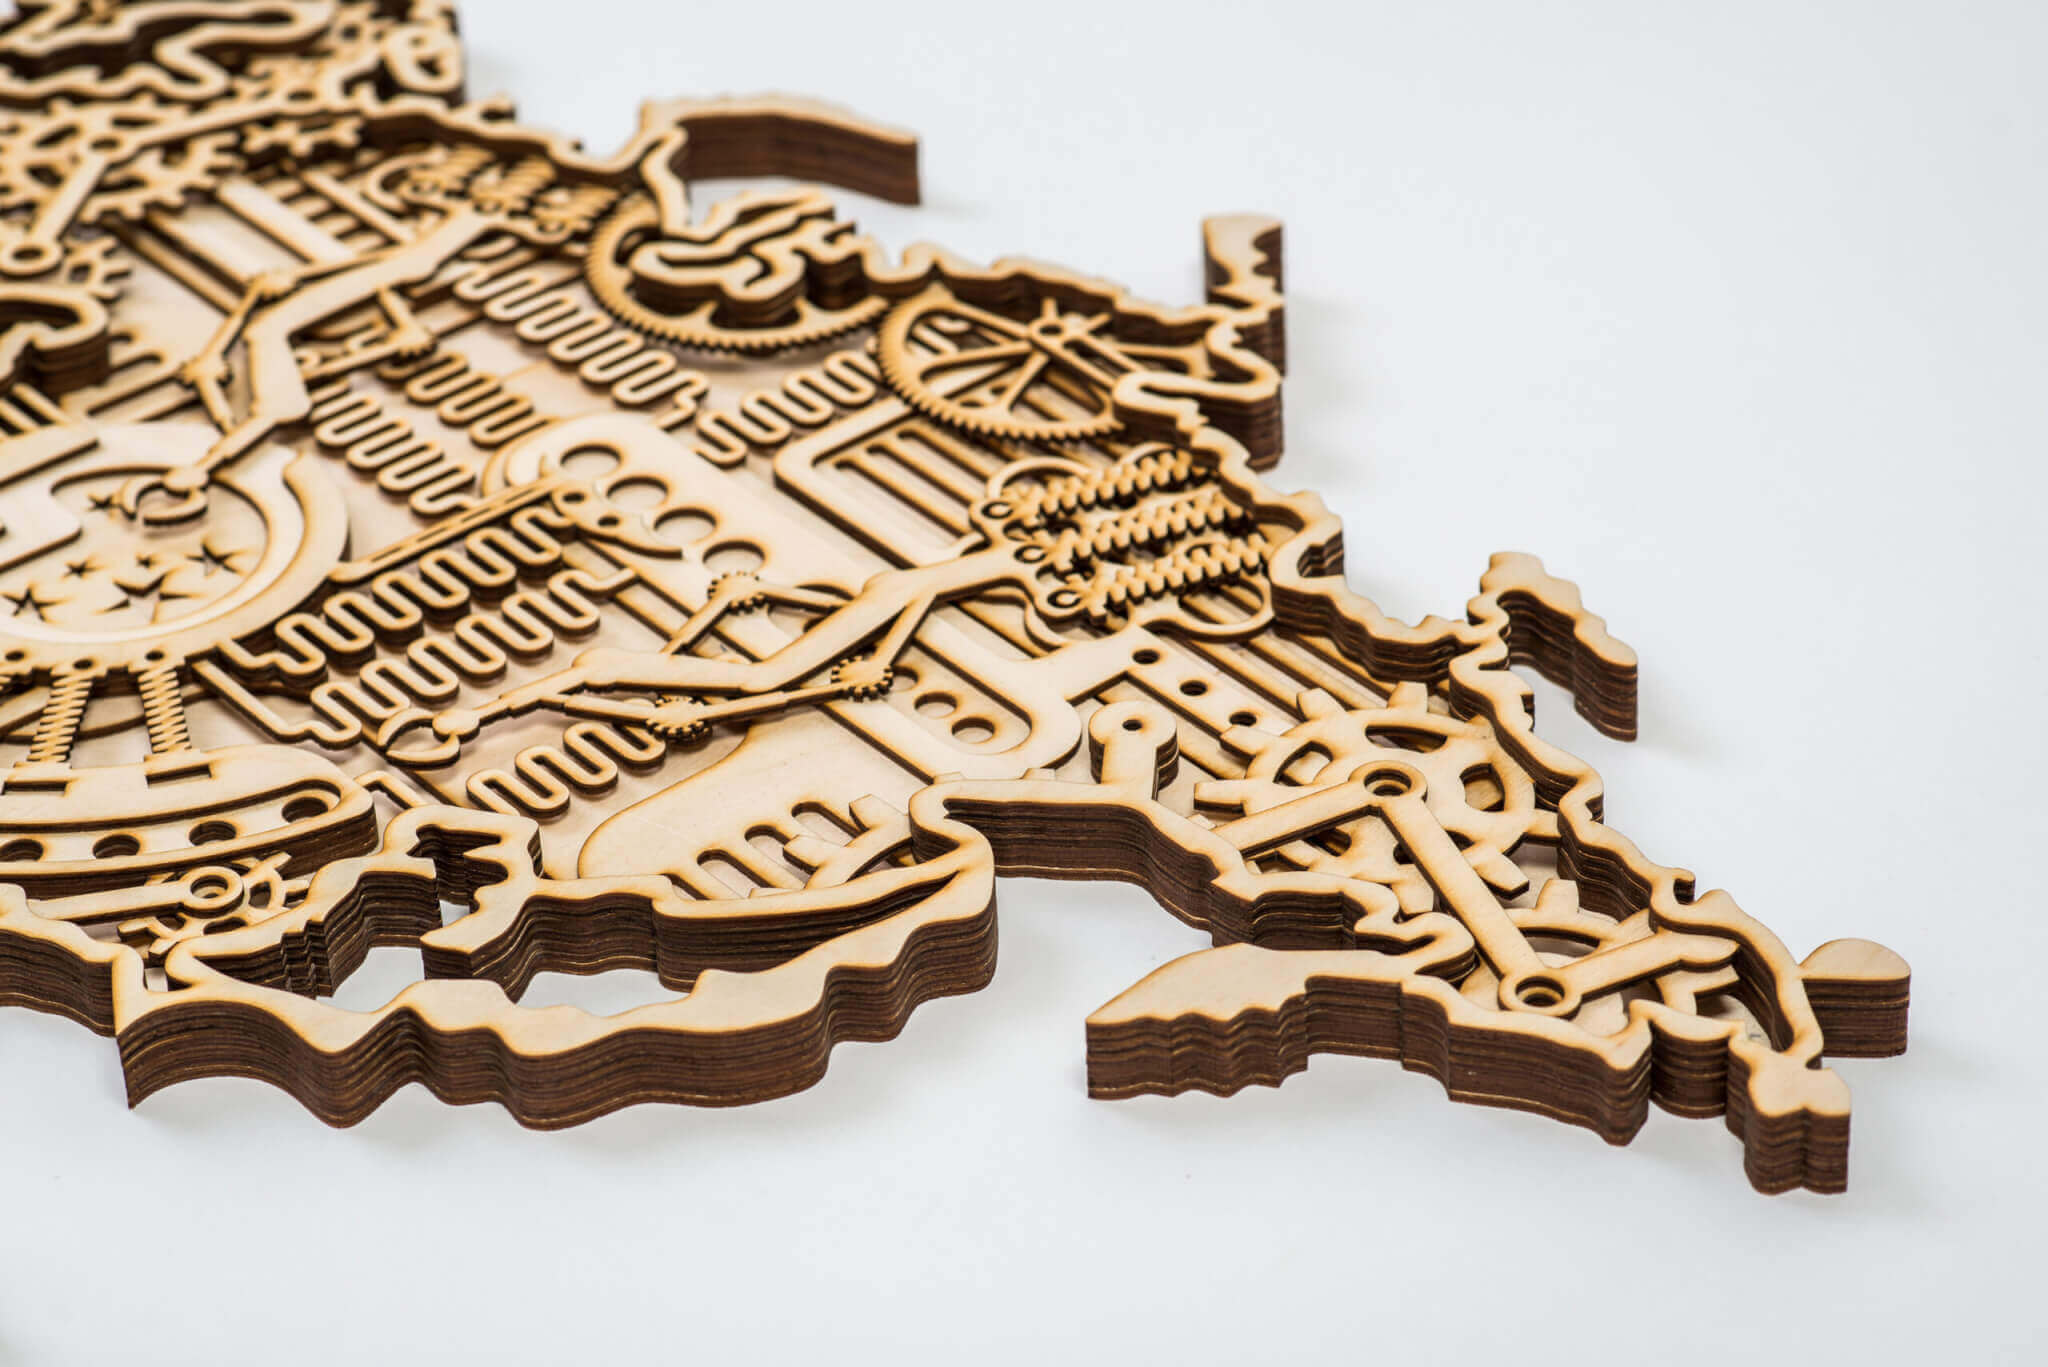 Industrial Wooden Map of the World - detail